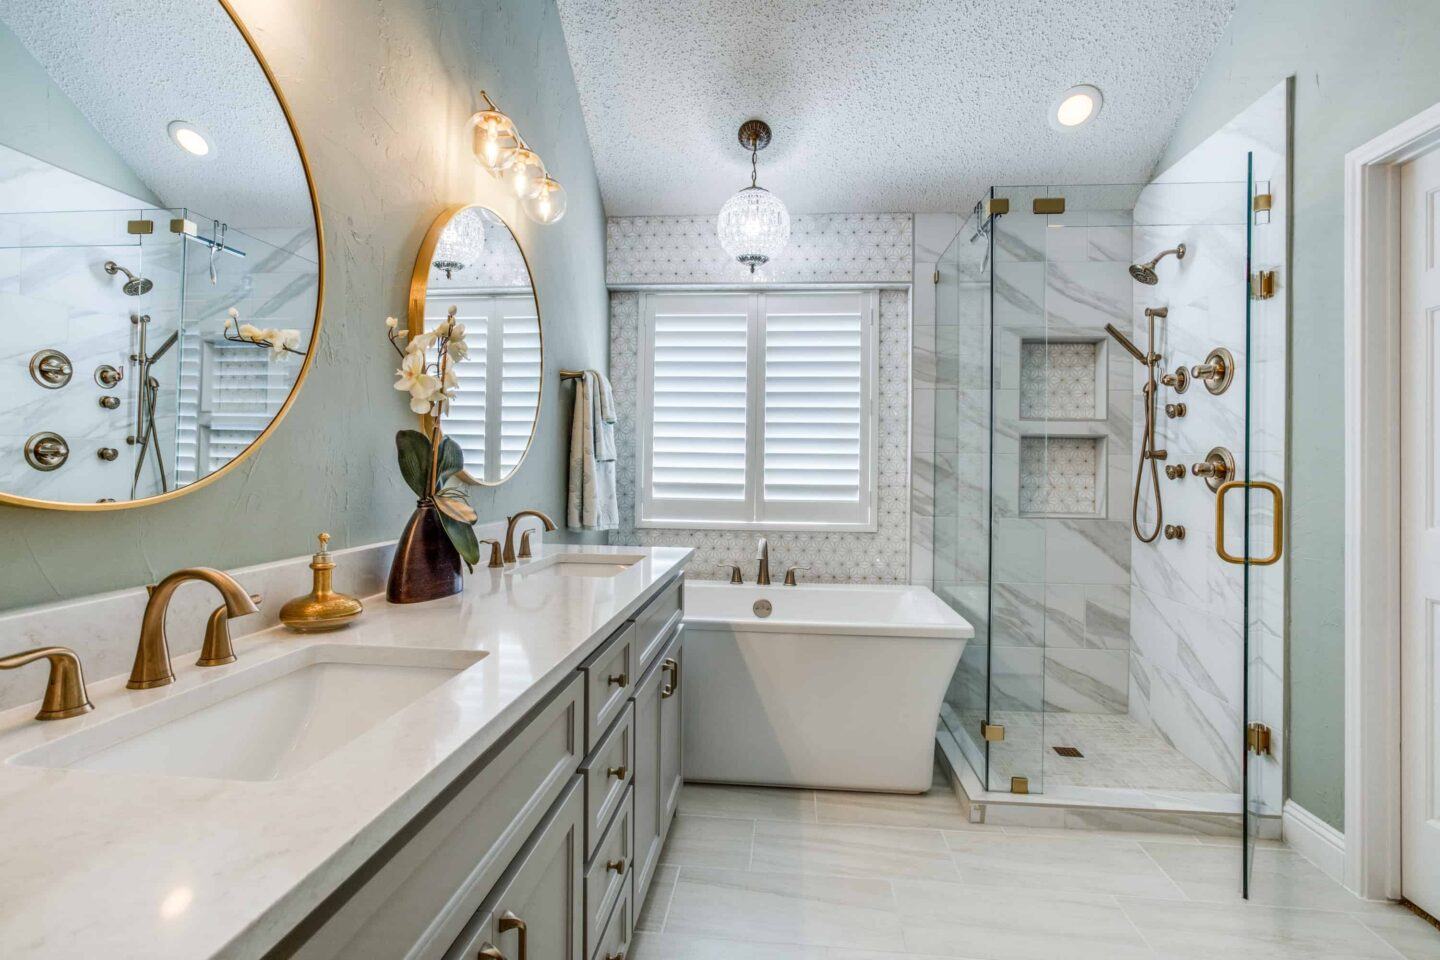 Bathroom Remodel by DFW Improved Plano TX